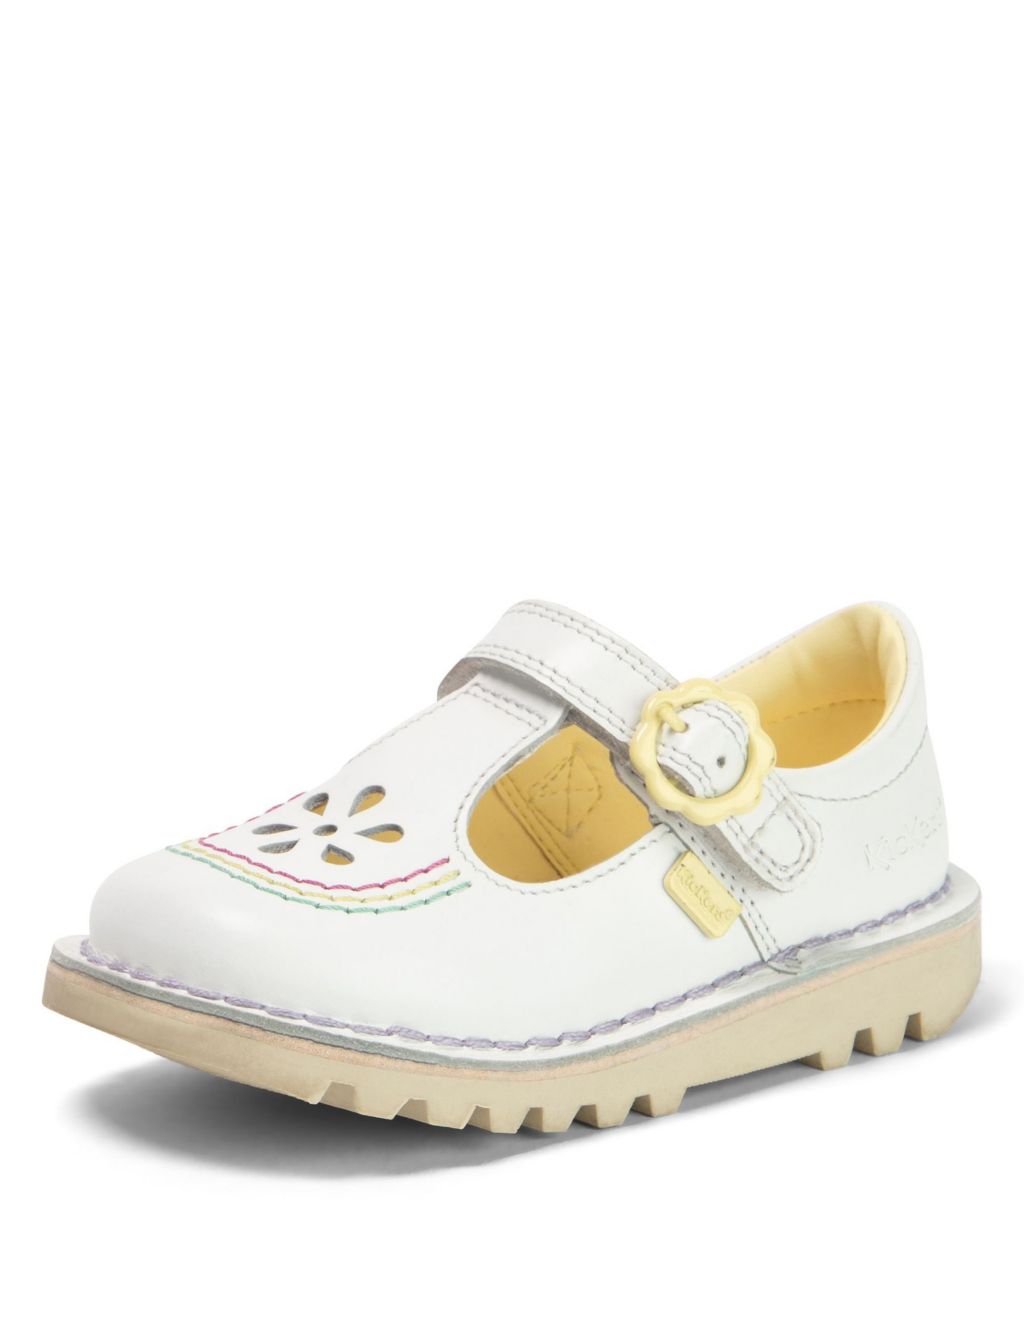 Kids' Leather Flower T-Bar Shoes (7 Small - 12 Small) image 5